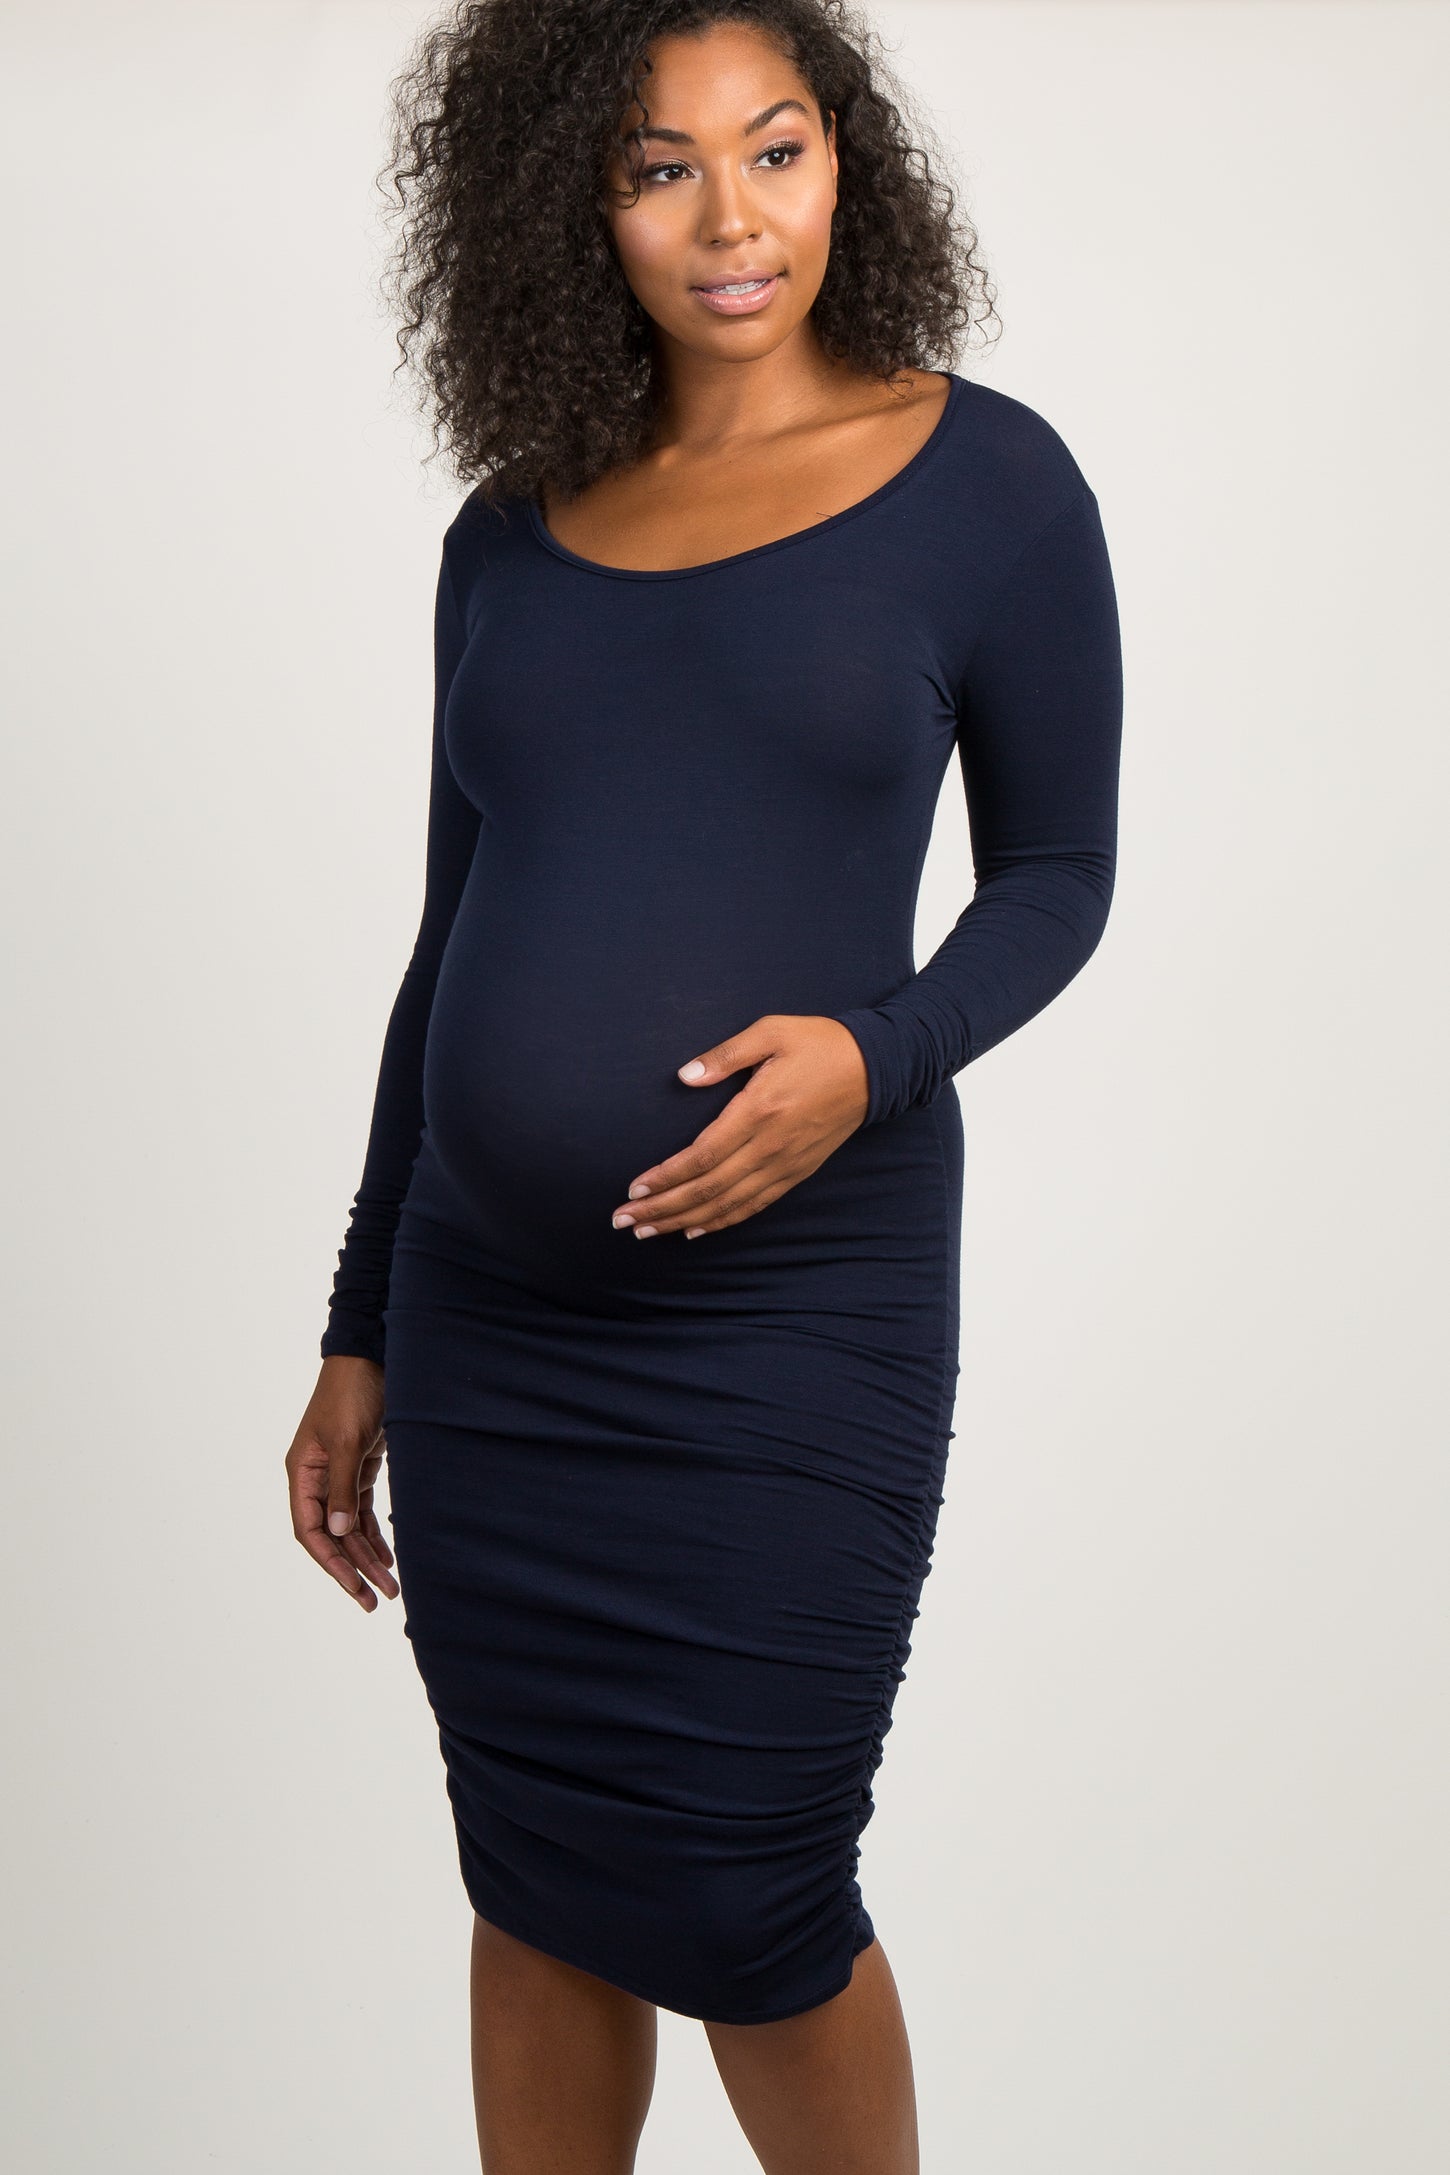 PinkBlush Navy Blue Ruched Long Sleeve Maternity Dress